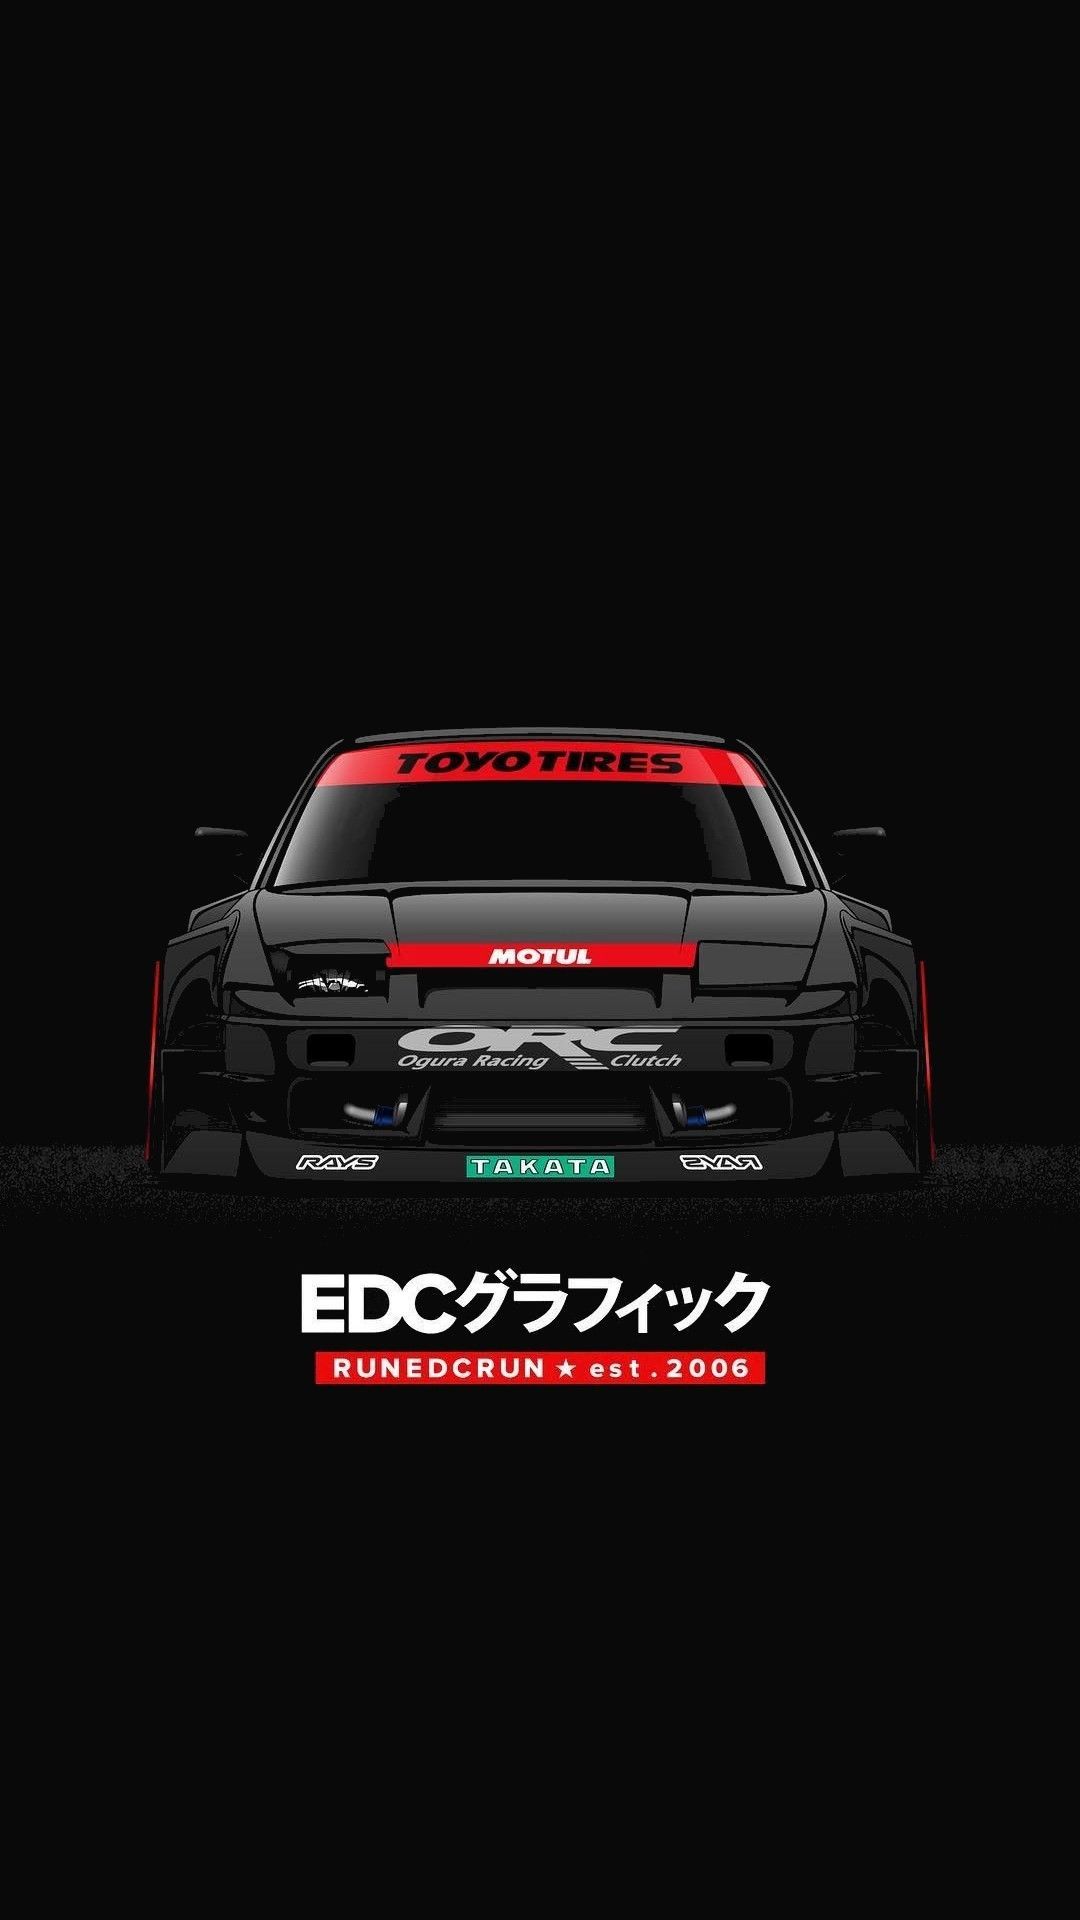 coldest jdm wallpapers